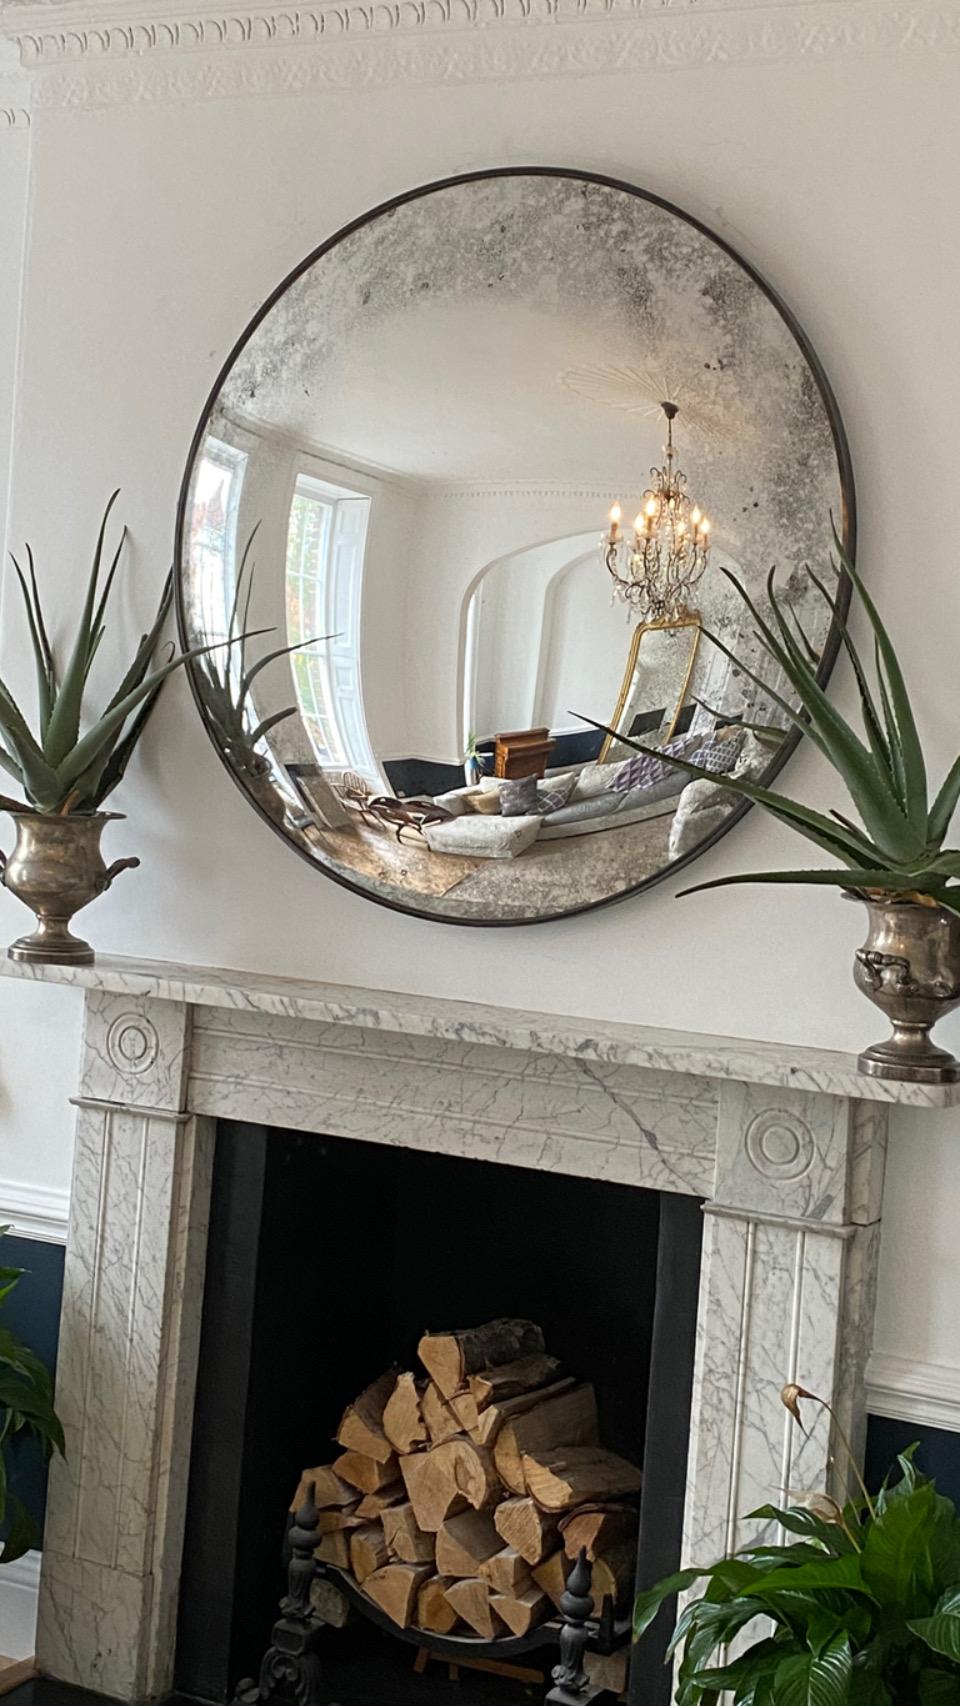 The Ferrara Carbonne is a highly decorative convex wall mirror that creates a focal point and adds elegance to any room. 

The mirror itself is silvered using traditional methods and fabricated from 6mm low iron glass with a curvature of 7 cms.